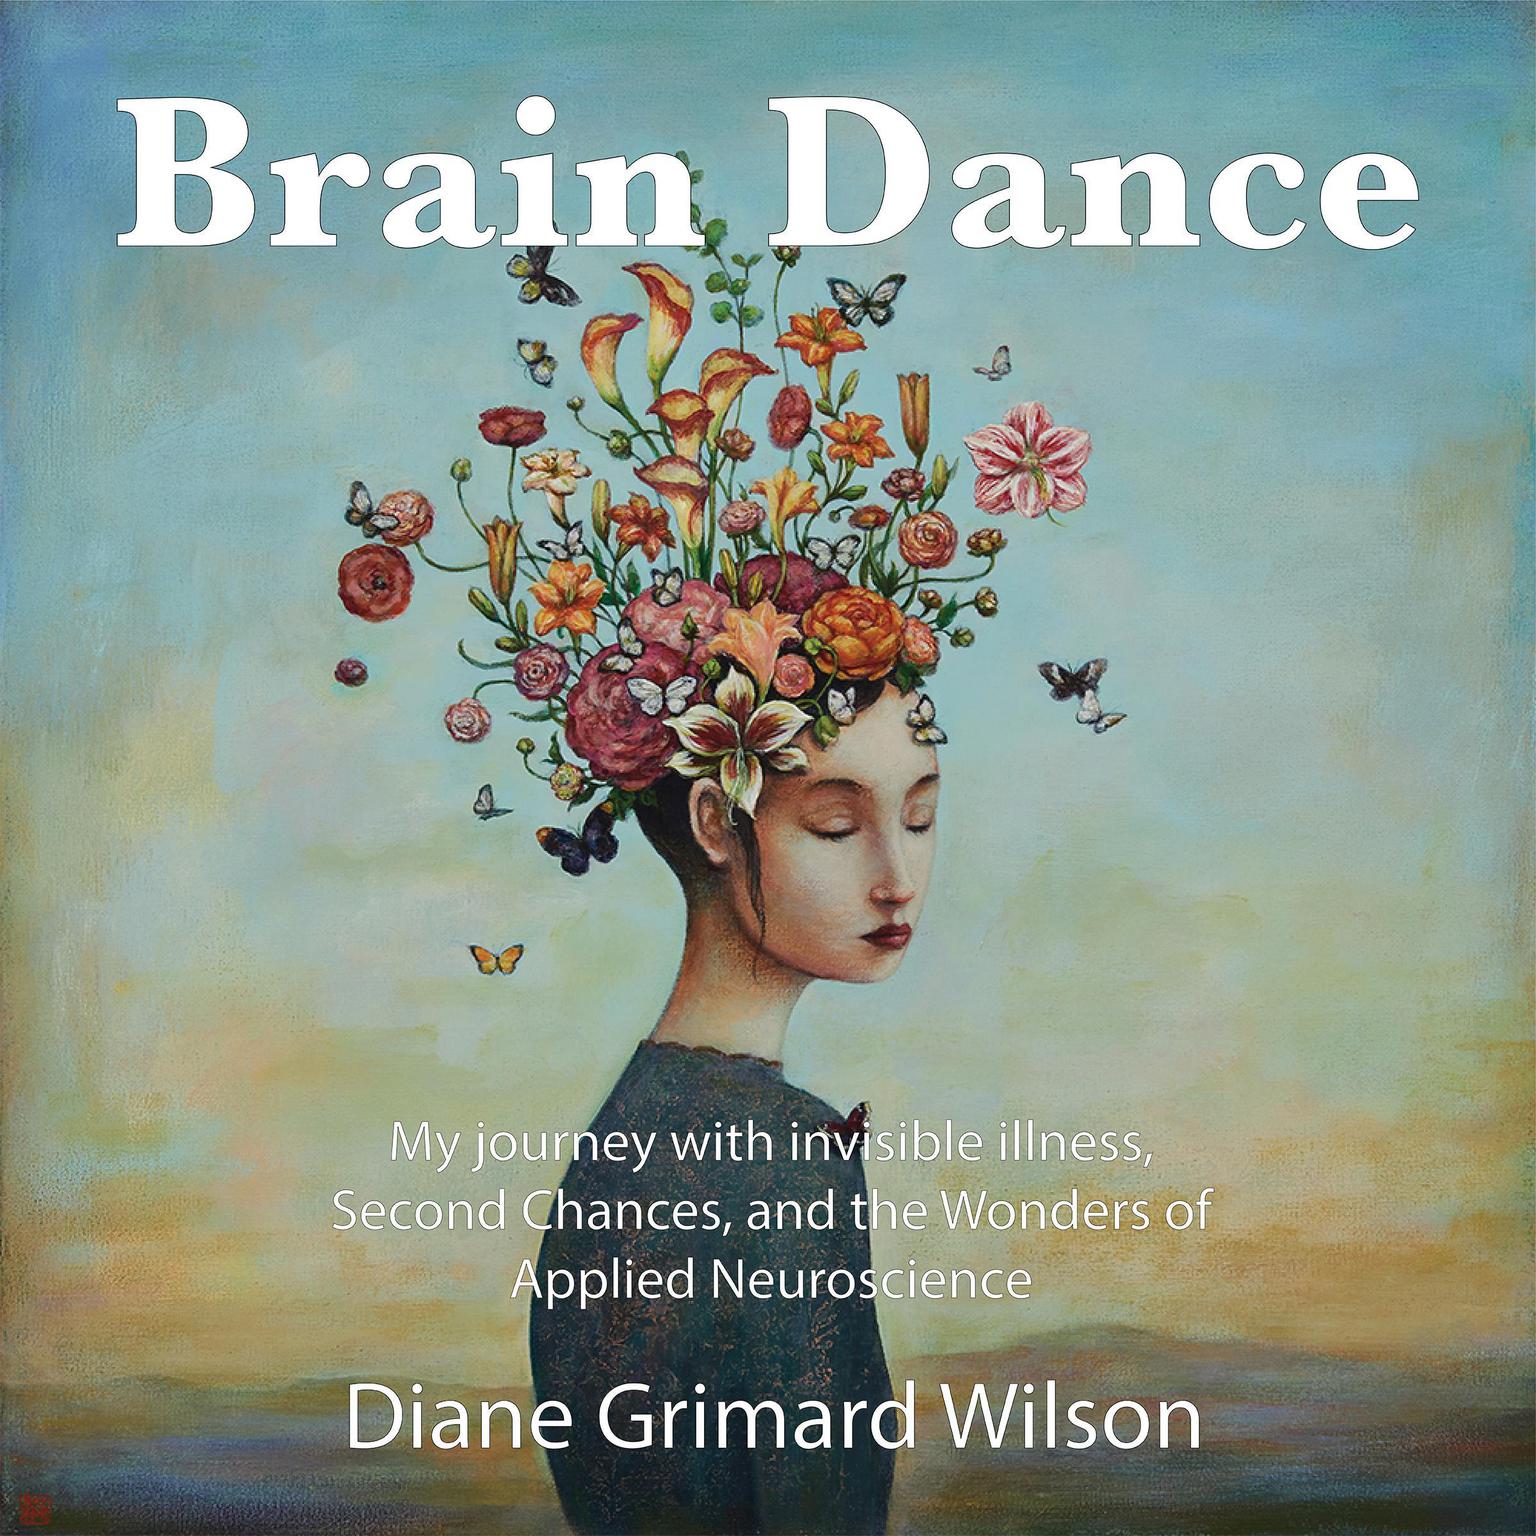 Brain Dance: My Journey with Invisible Illness, Second Chance and the Wonders of Applied Neuroscience Audiobook, by Diane Grimard Wilson